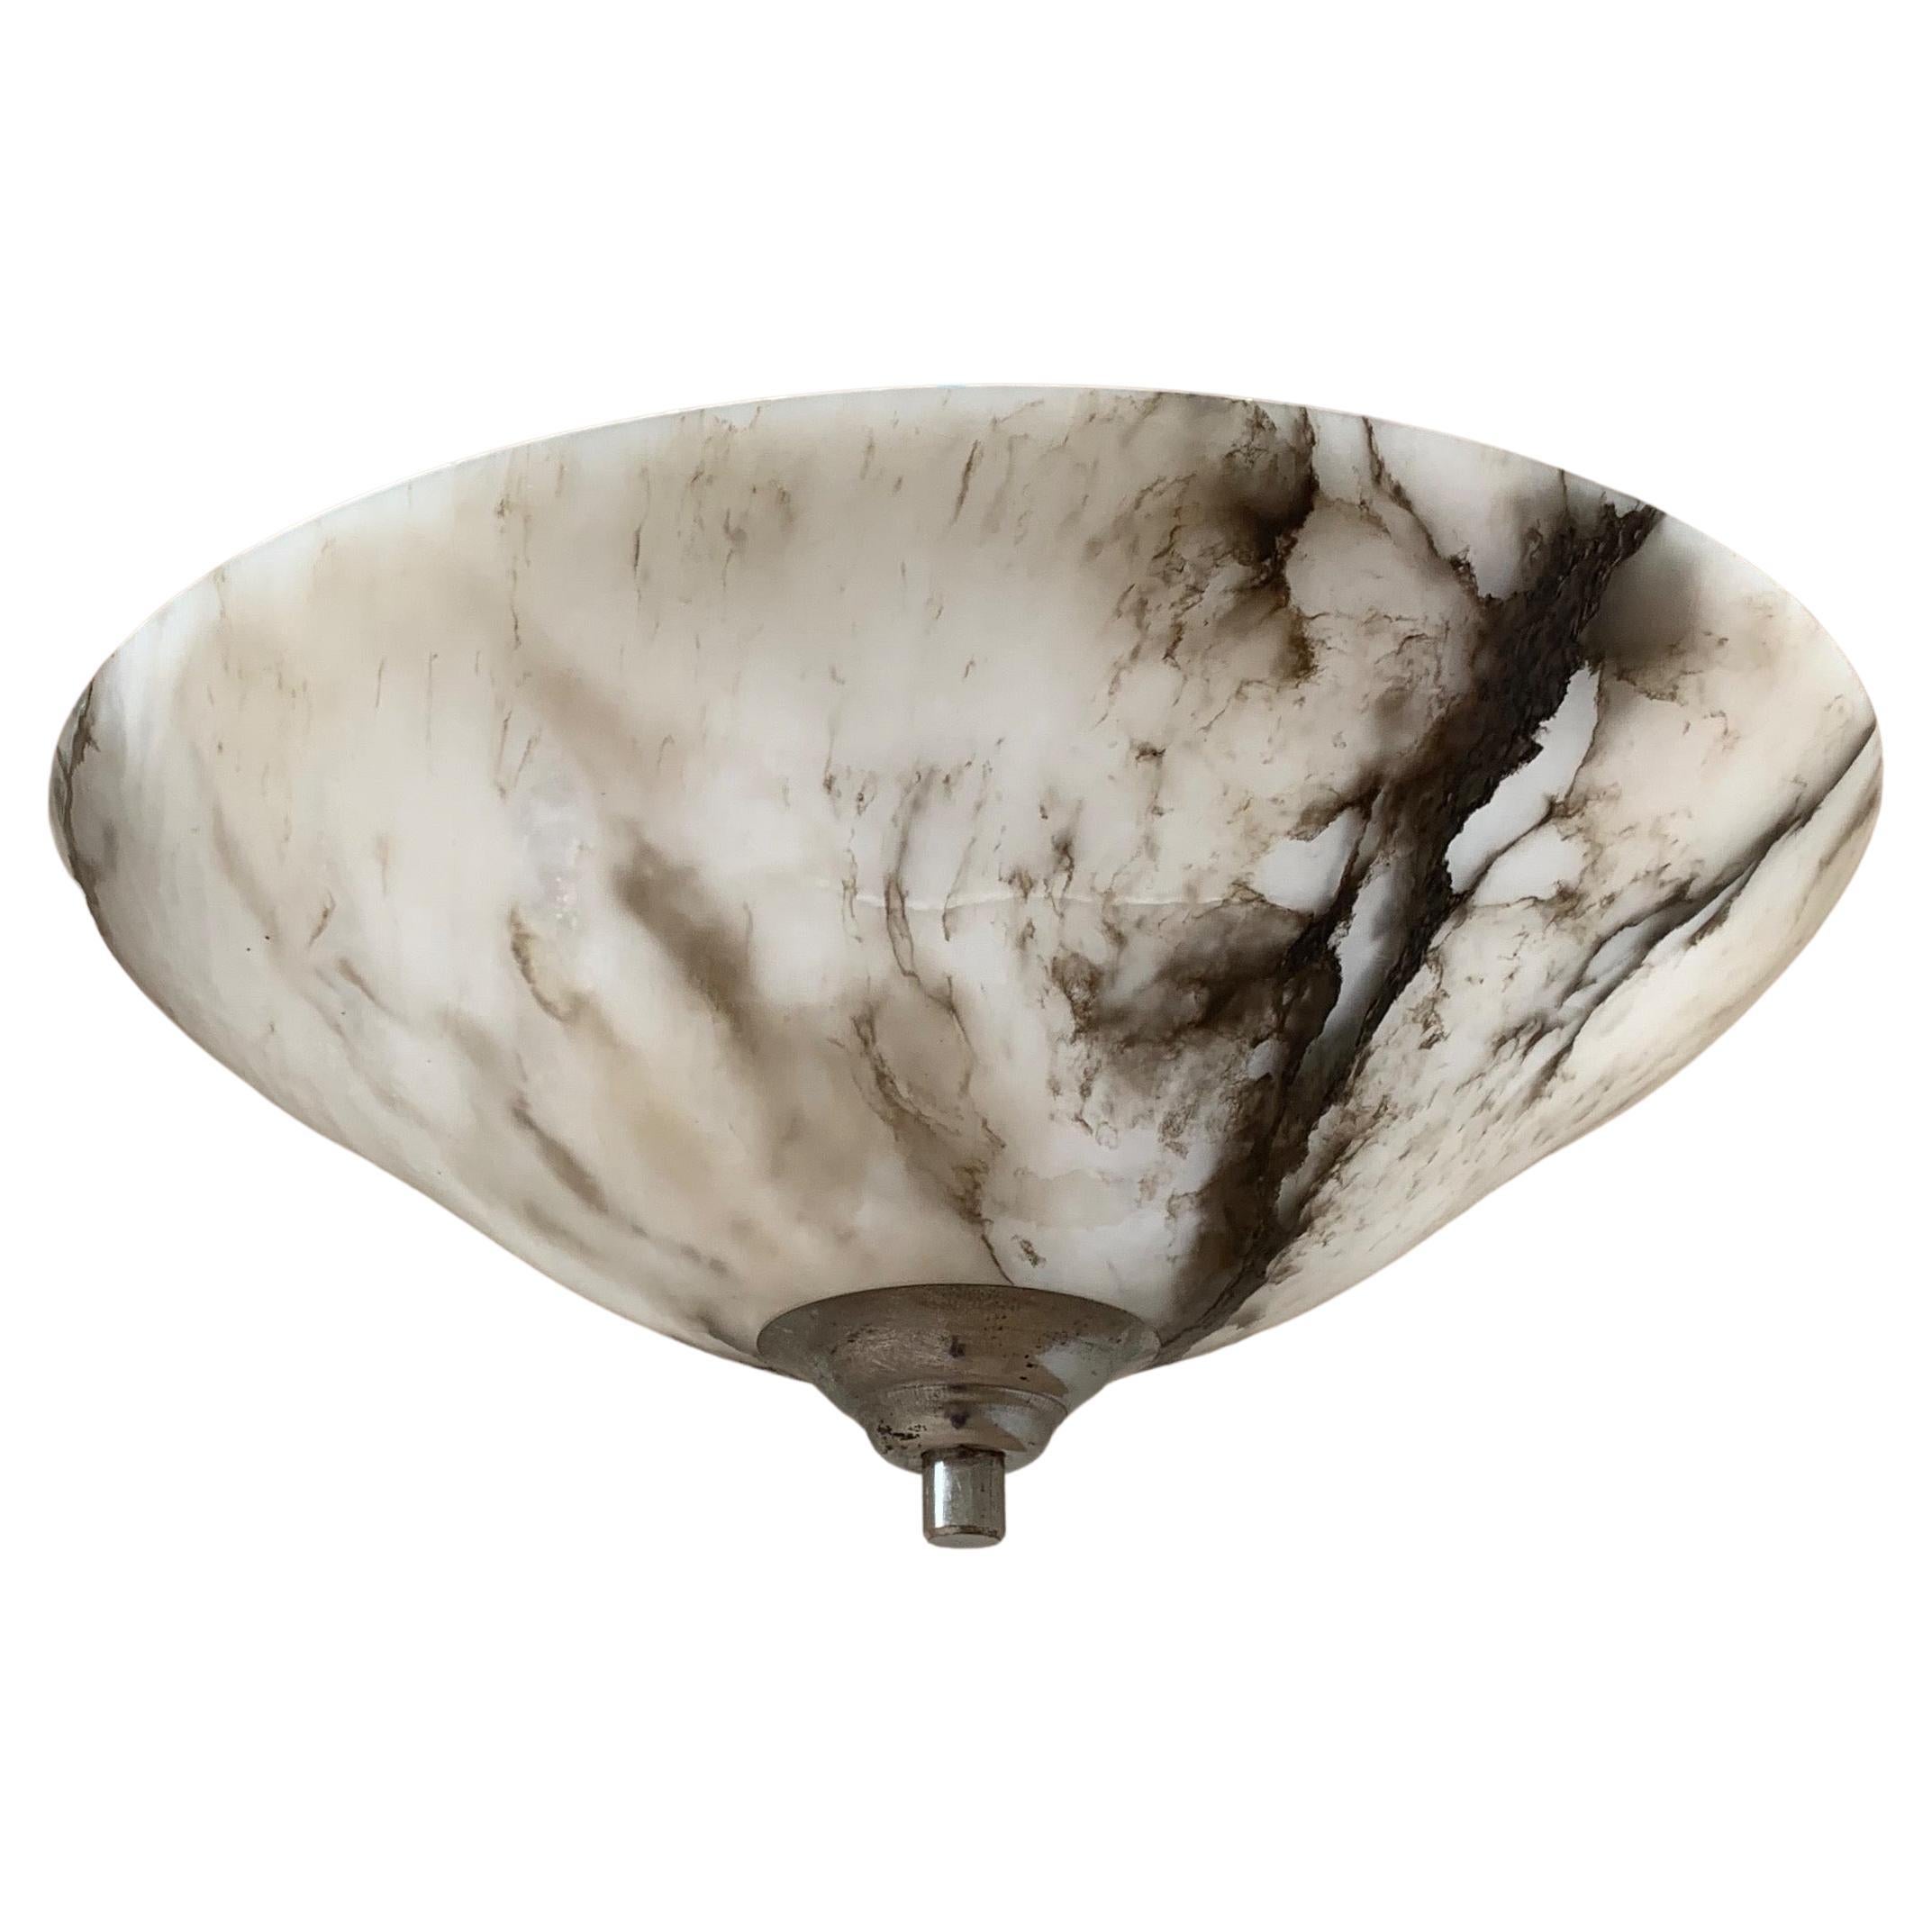 Awesome Art Deco Pendant Light with Stunning Alabaster Mineral Stone Shade, 1920 For Sale 12